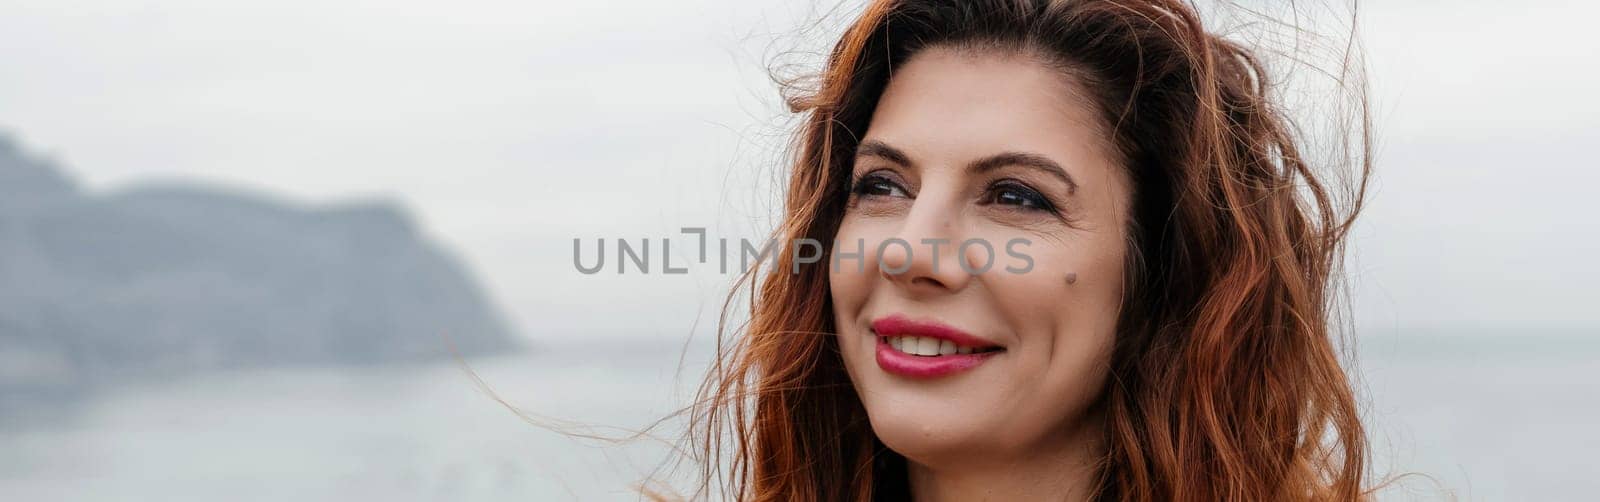 Portrait windswept hair happy woman against a backdrop of mountains and sea. Daylight illuminates the tranquil outdoor setting.